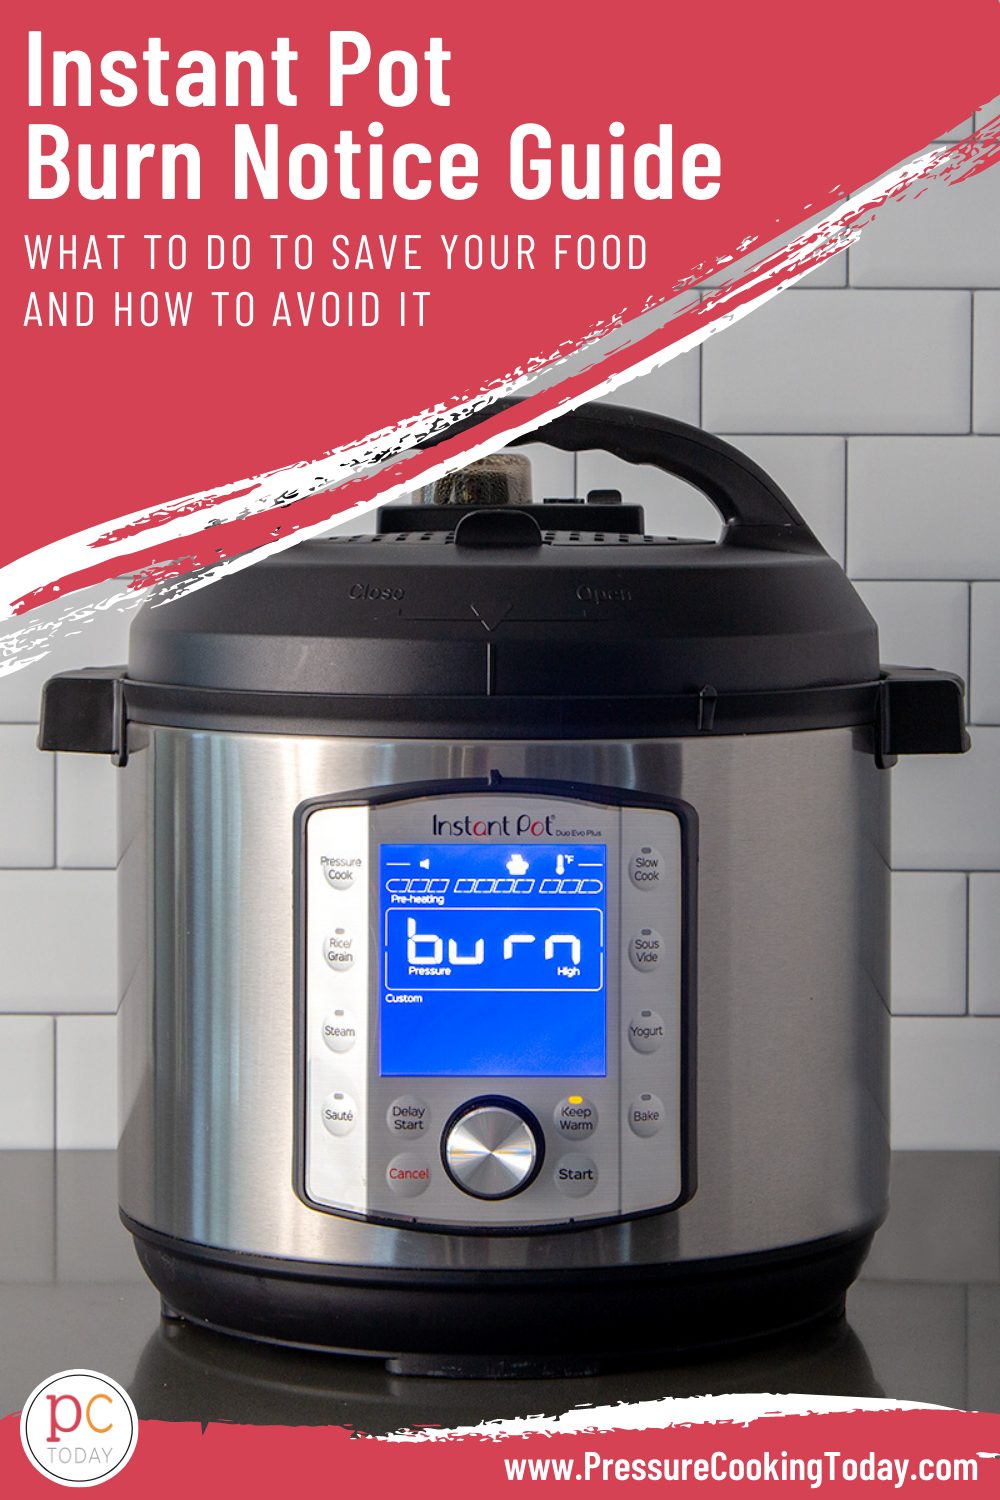 Got the burn notice? DON'T PANIC!!! You can save your meal! Learn what to do when you see the Instant Pot burn notice to save your dinner and enjoy a burn-free meal. Plus, learn how to avoid the Instant Pot burn message in the future. via @PressureCook2da